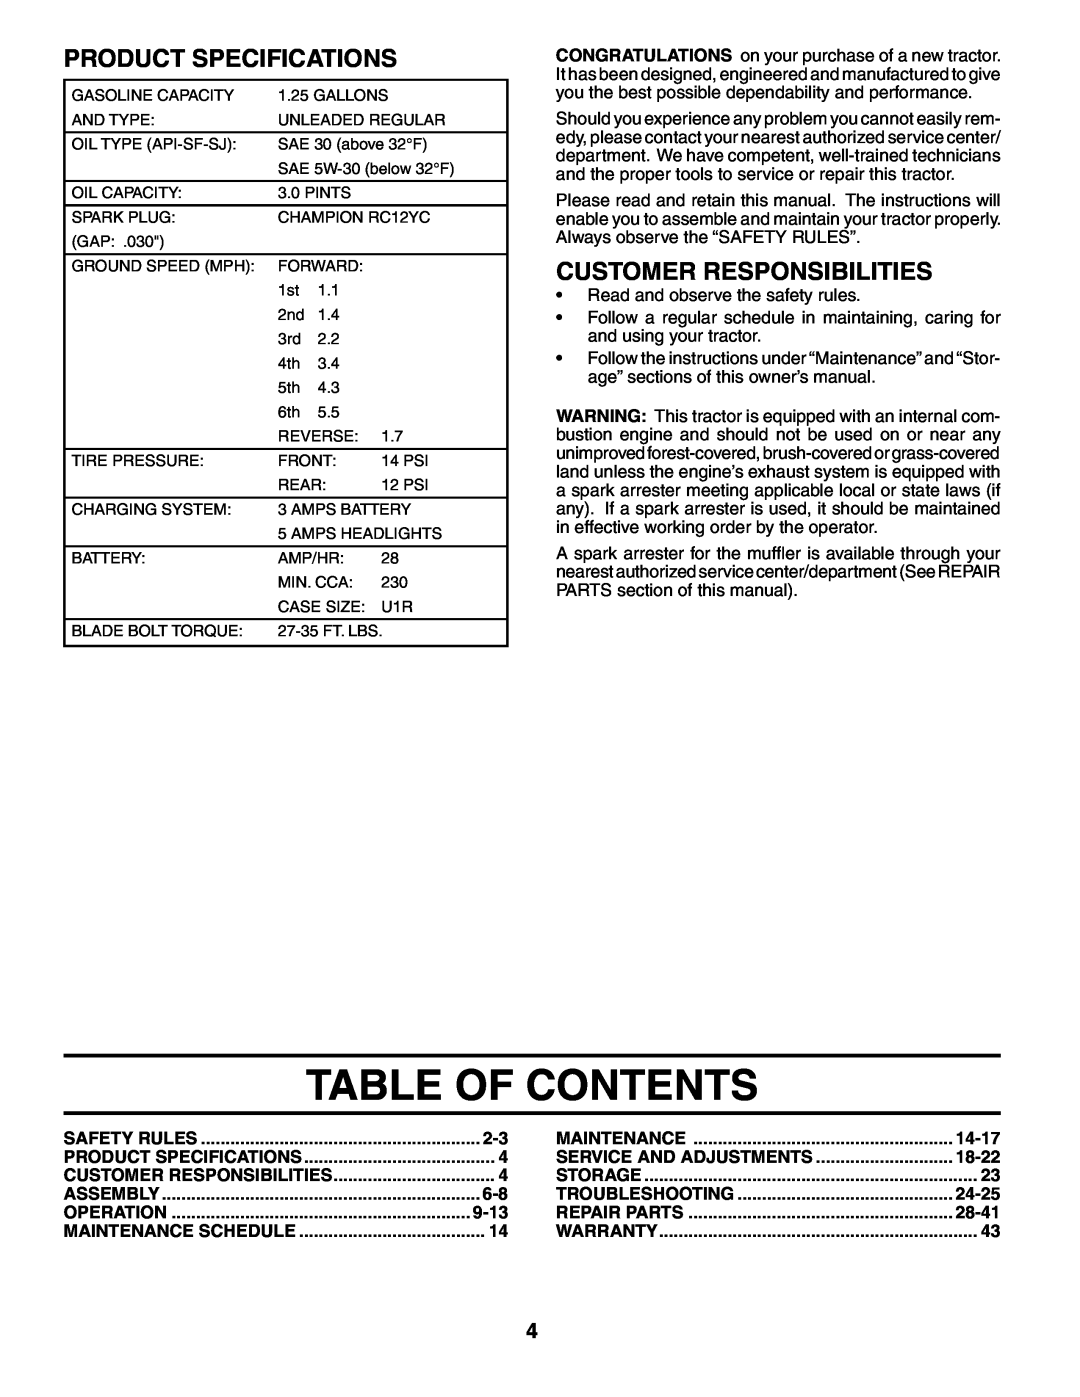 Poulan PO17542STB manual Table Of Contents, Product Specifications, Customer Responsibilities 